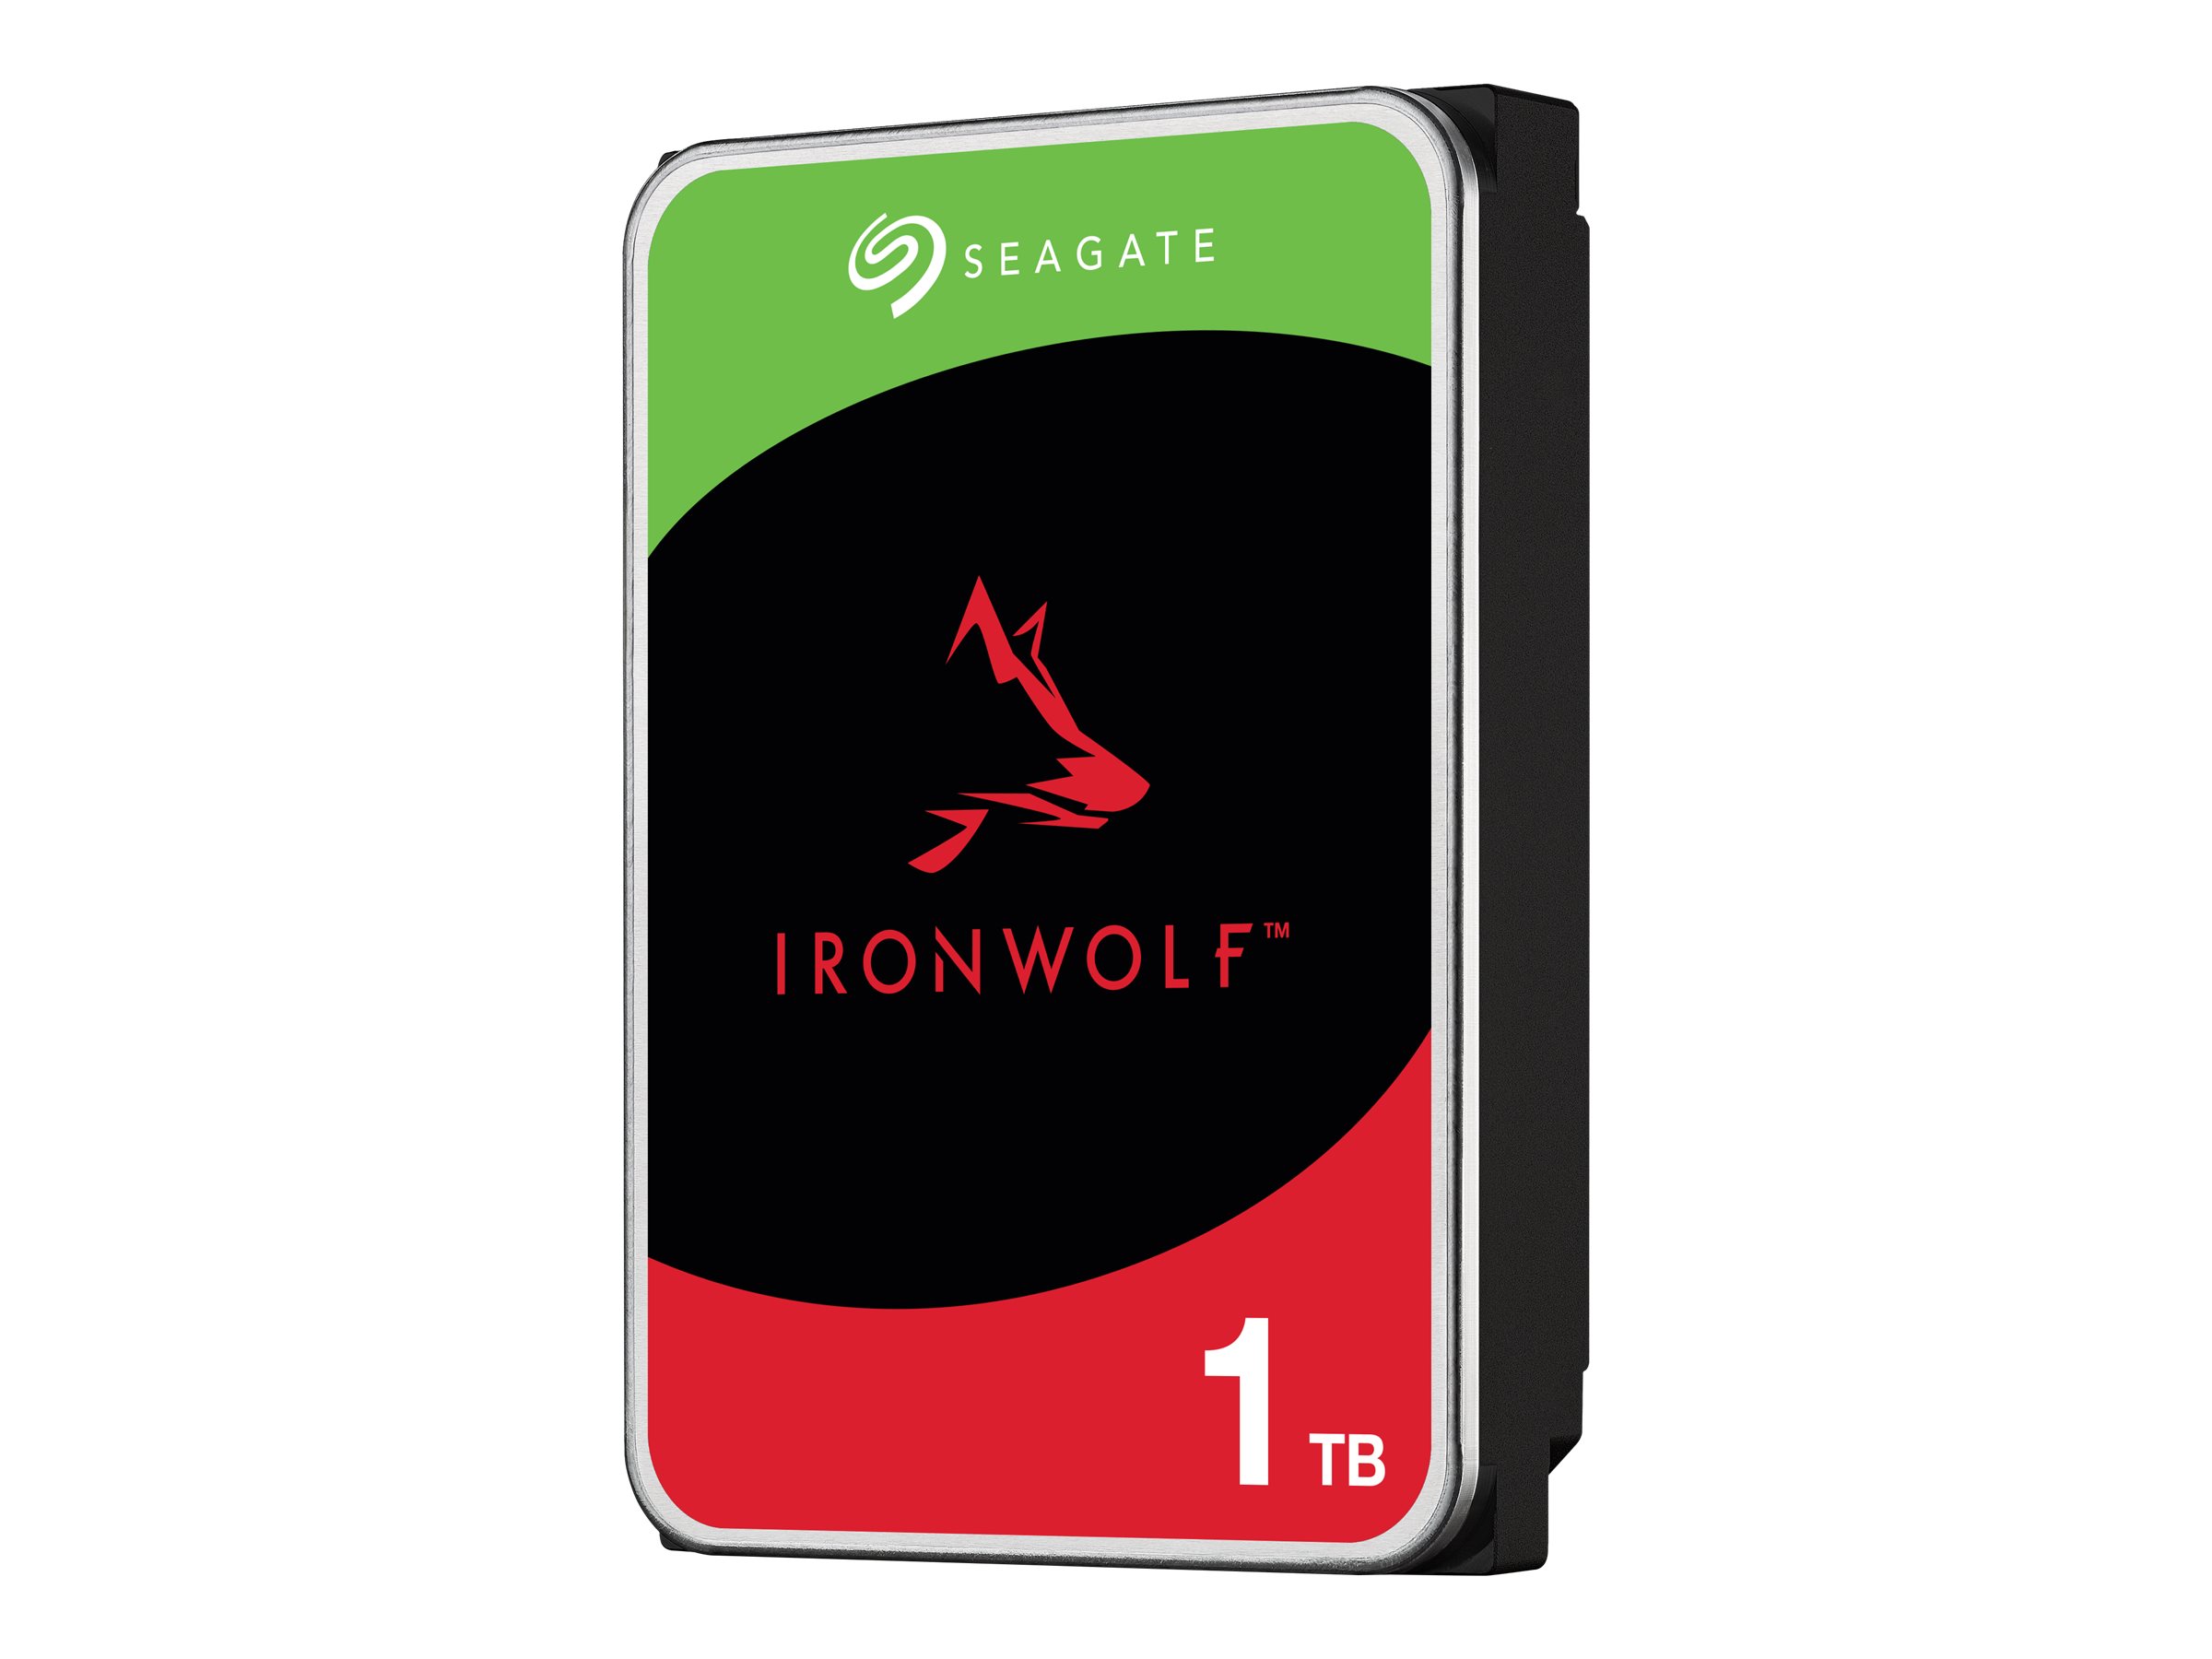 Seagate IronWolf ST1000VN008 - Disque dur - 1 To - interne - 3.5" - SATA 6Gb/s - 5400 tours/min - mémoire tampon : 256 Mo - ST1000VN008 - Disques durs internes